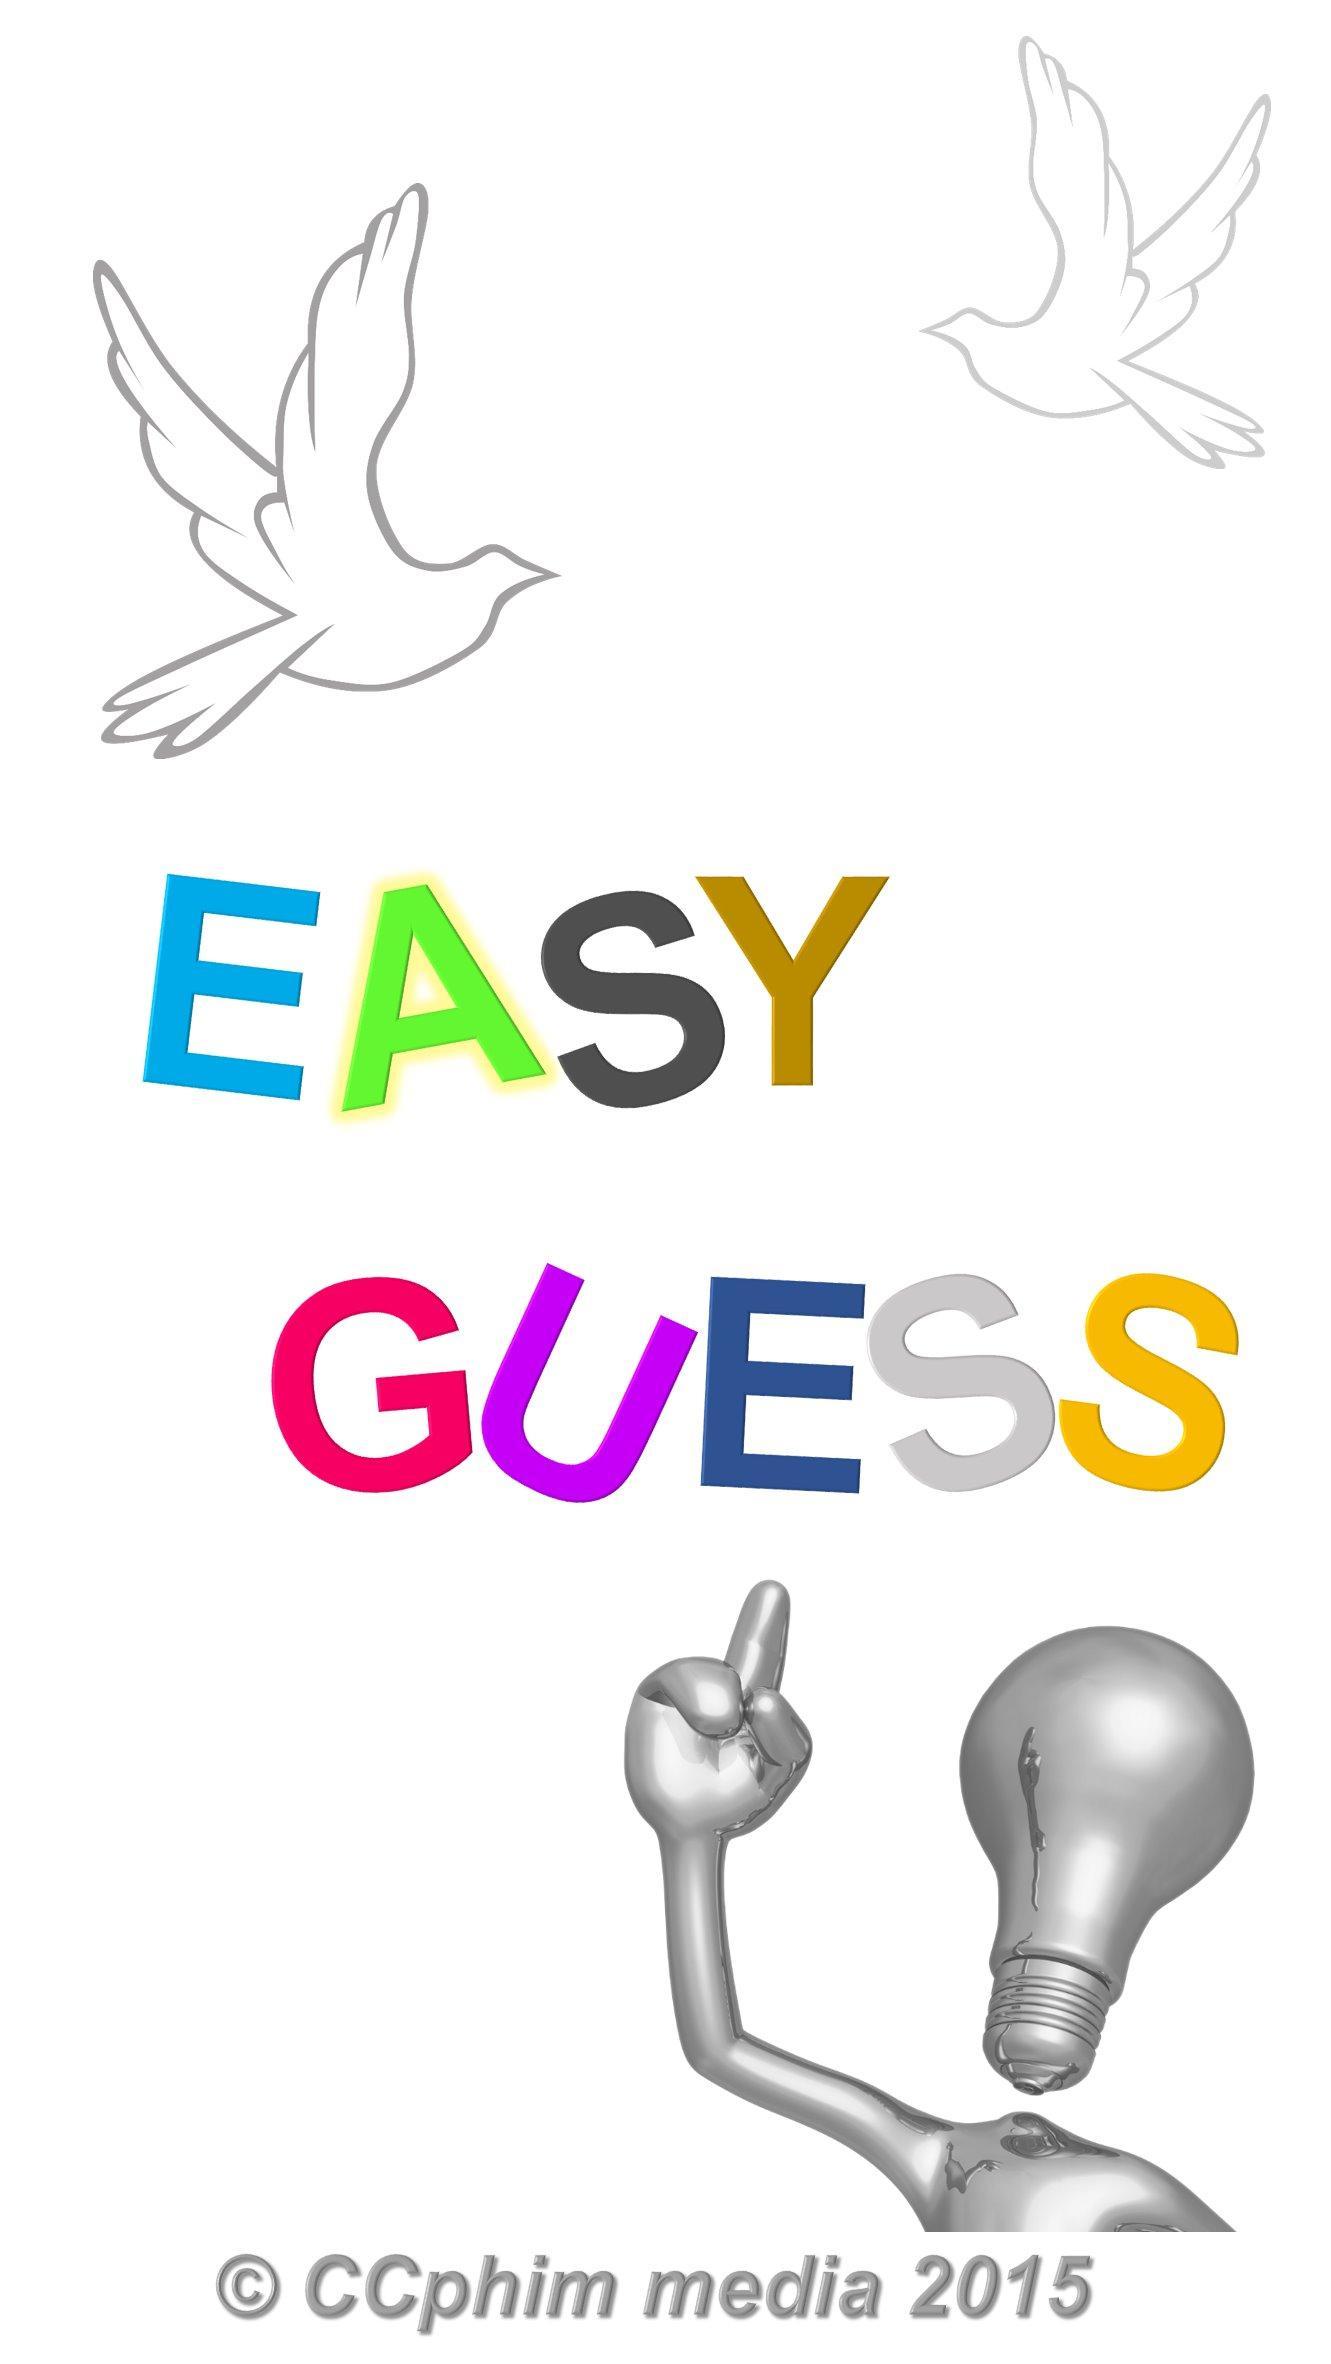 Sociologi strimmel Revision Easy Guess (Guess-A-Sketch) for Android - APK Download